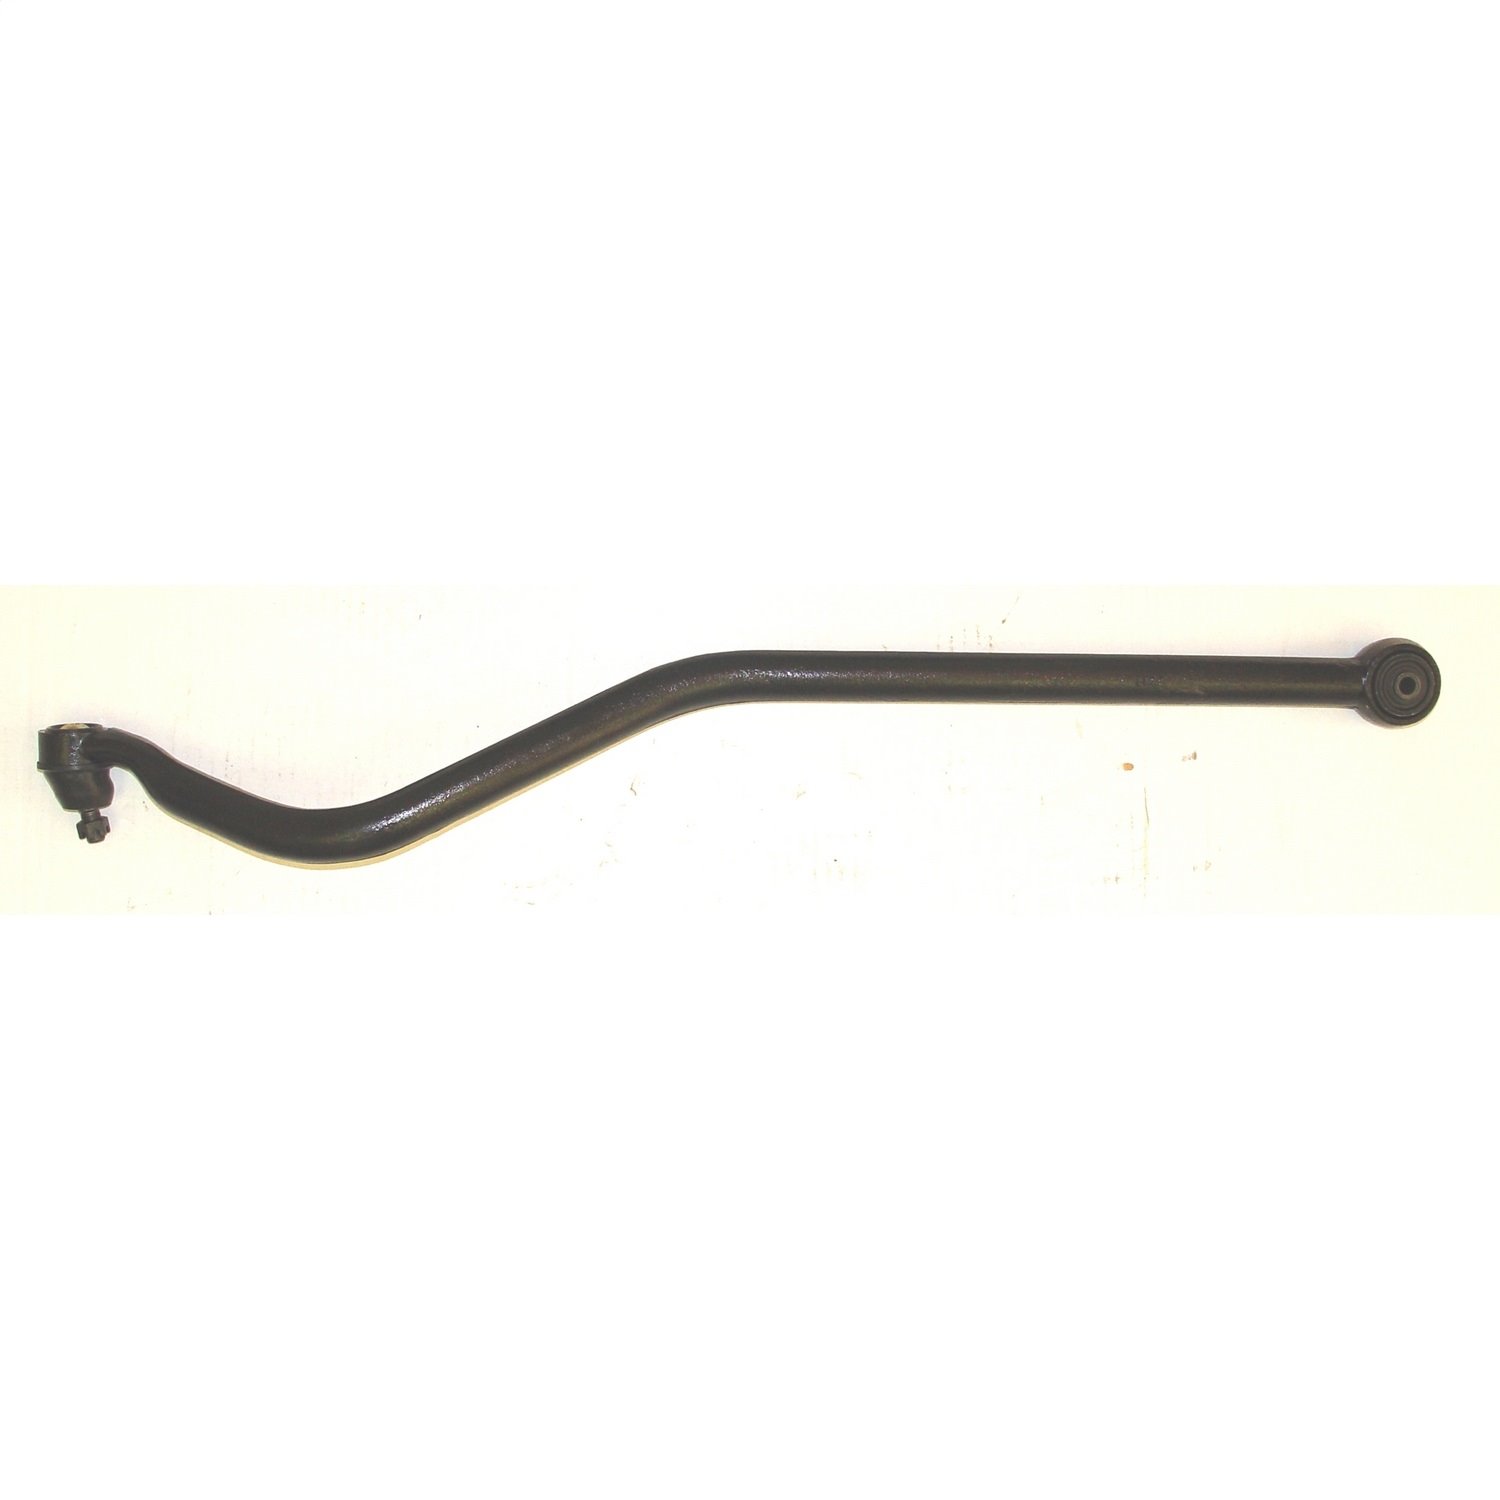 Replacement front track bar from Omix-ADA, Fits 84-90 Jeep Cherokee XJIt is non-adjustable.